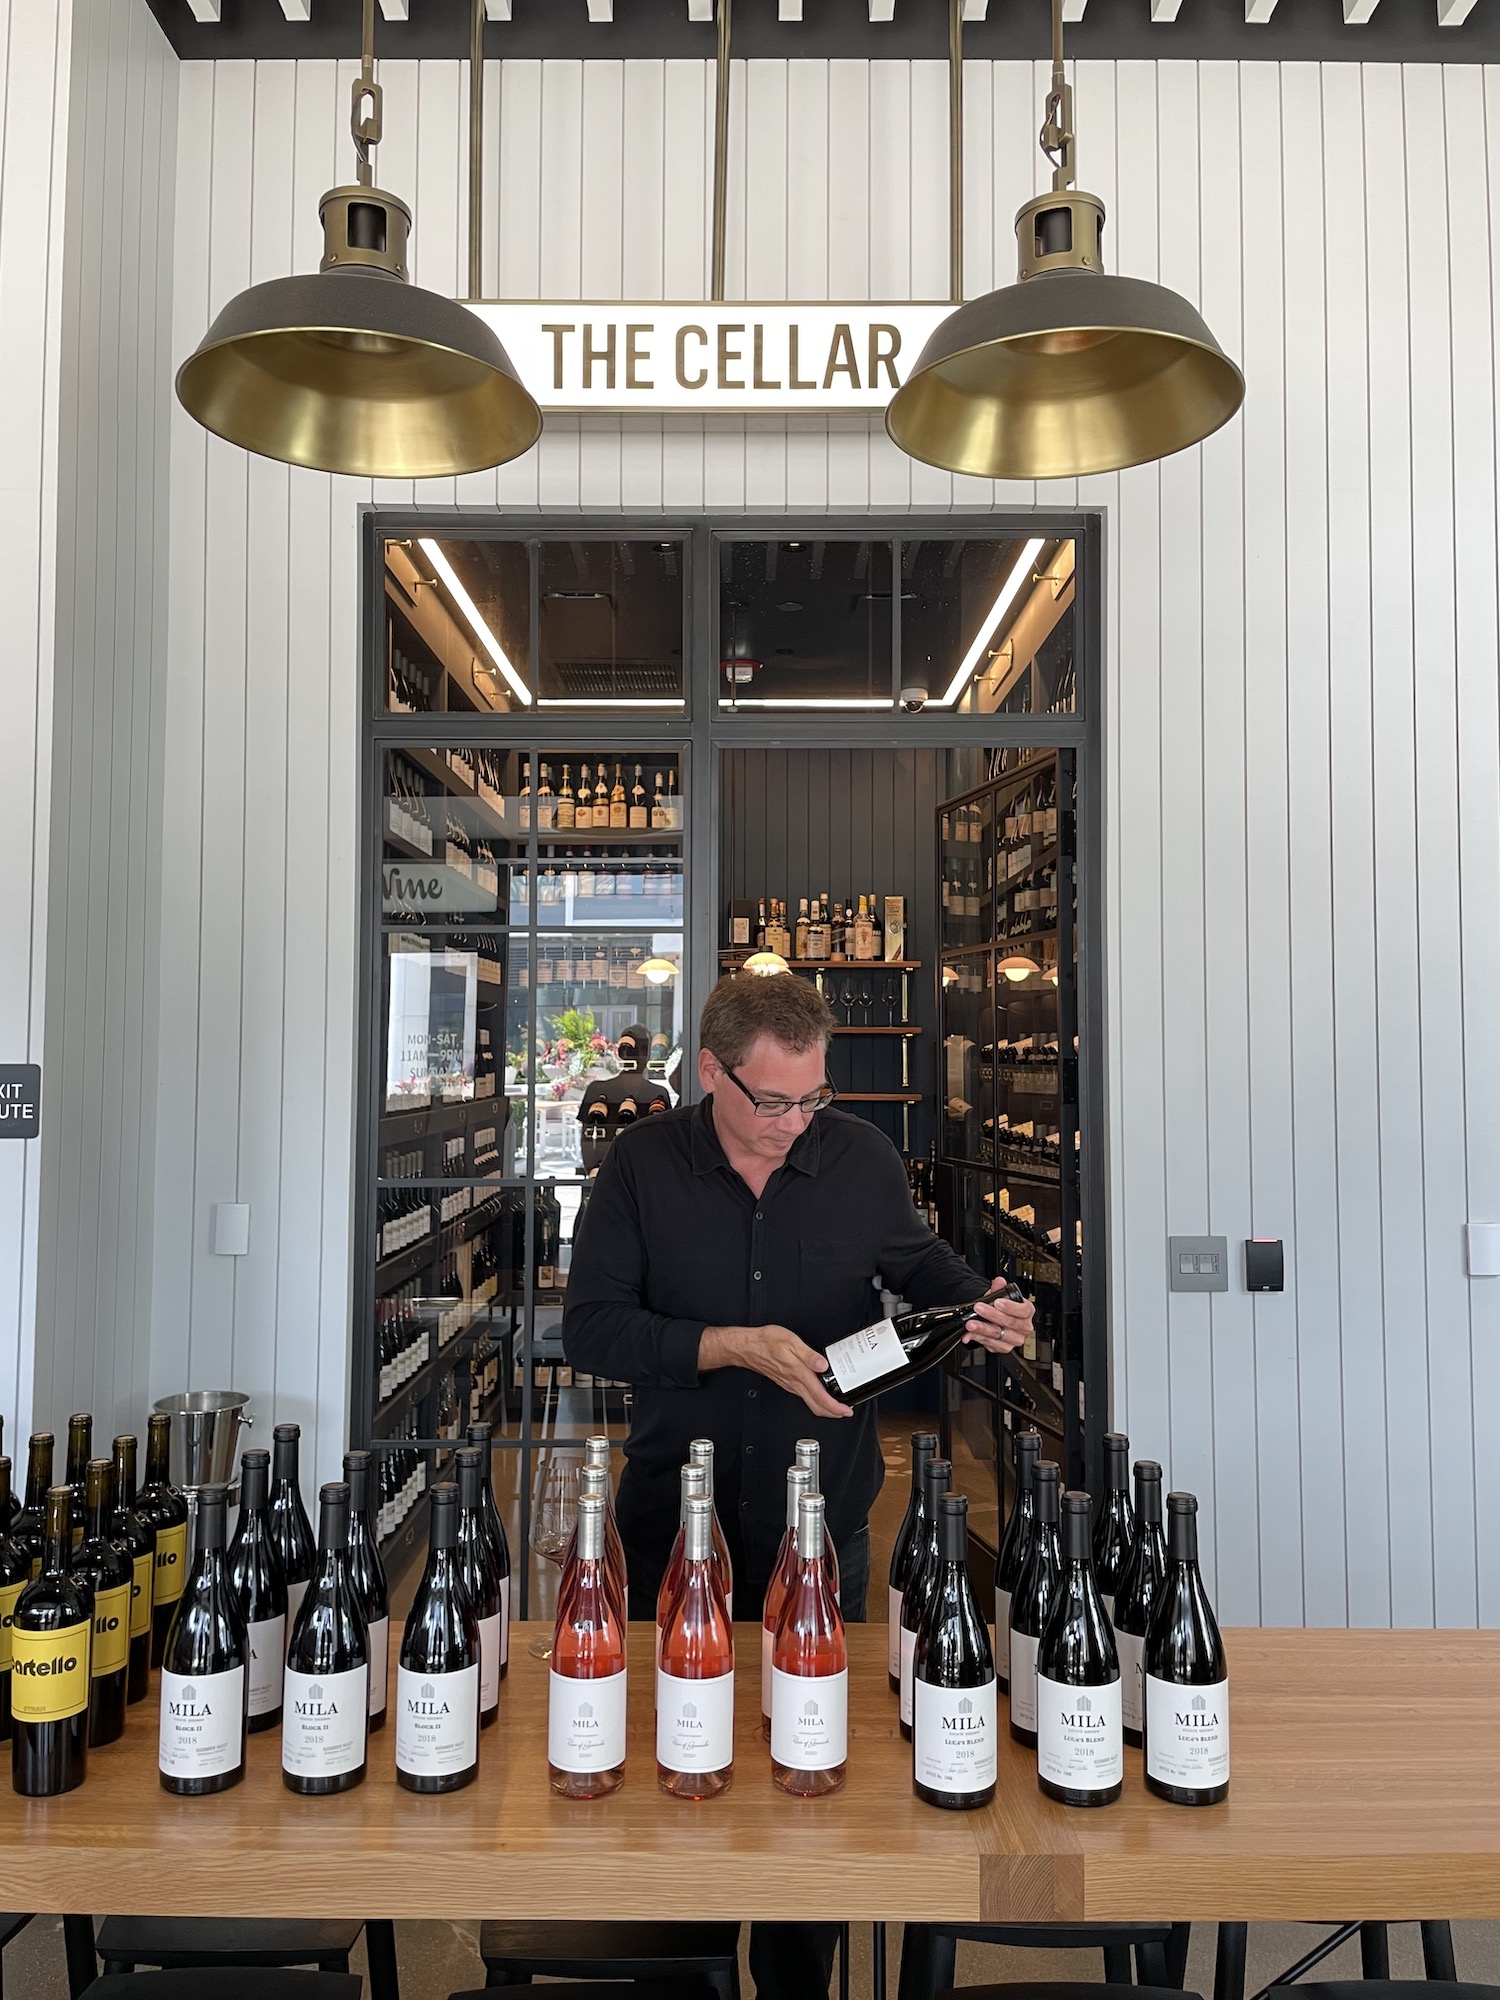 michael at The Cellar with a lineup of bottles